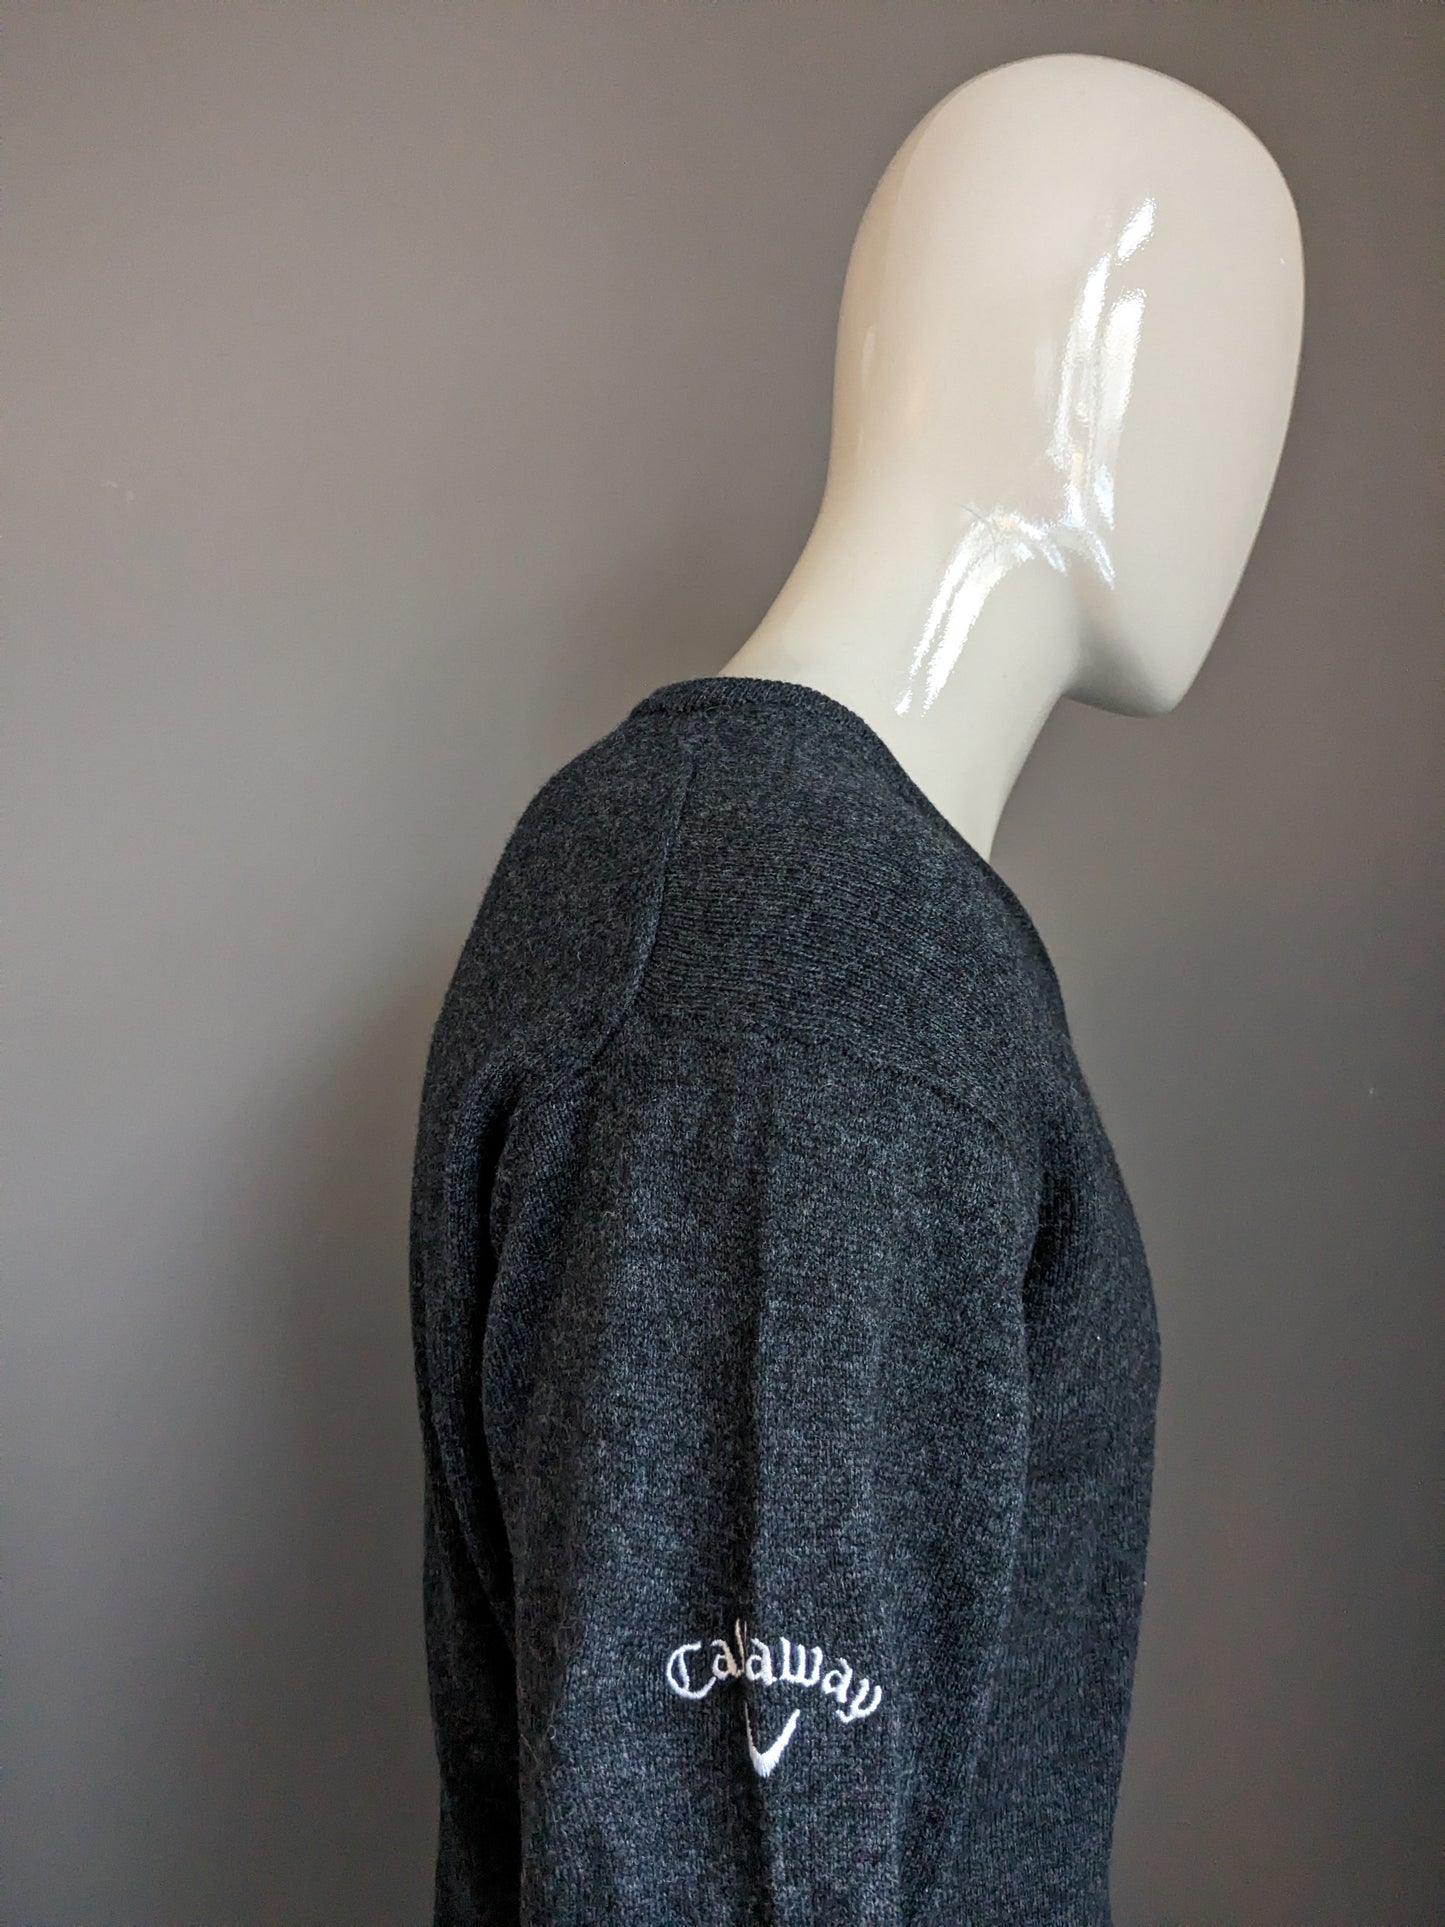 Callaway woolen sweater with V-neck. Dark gray mixed. Size S.